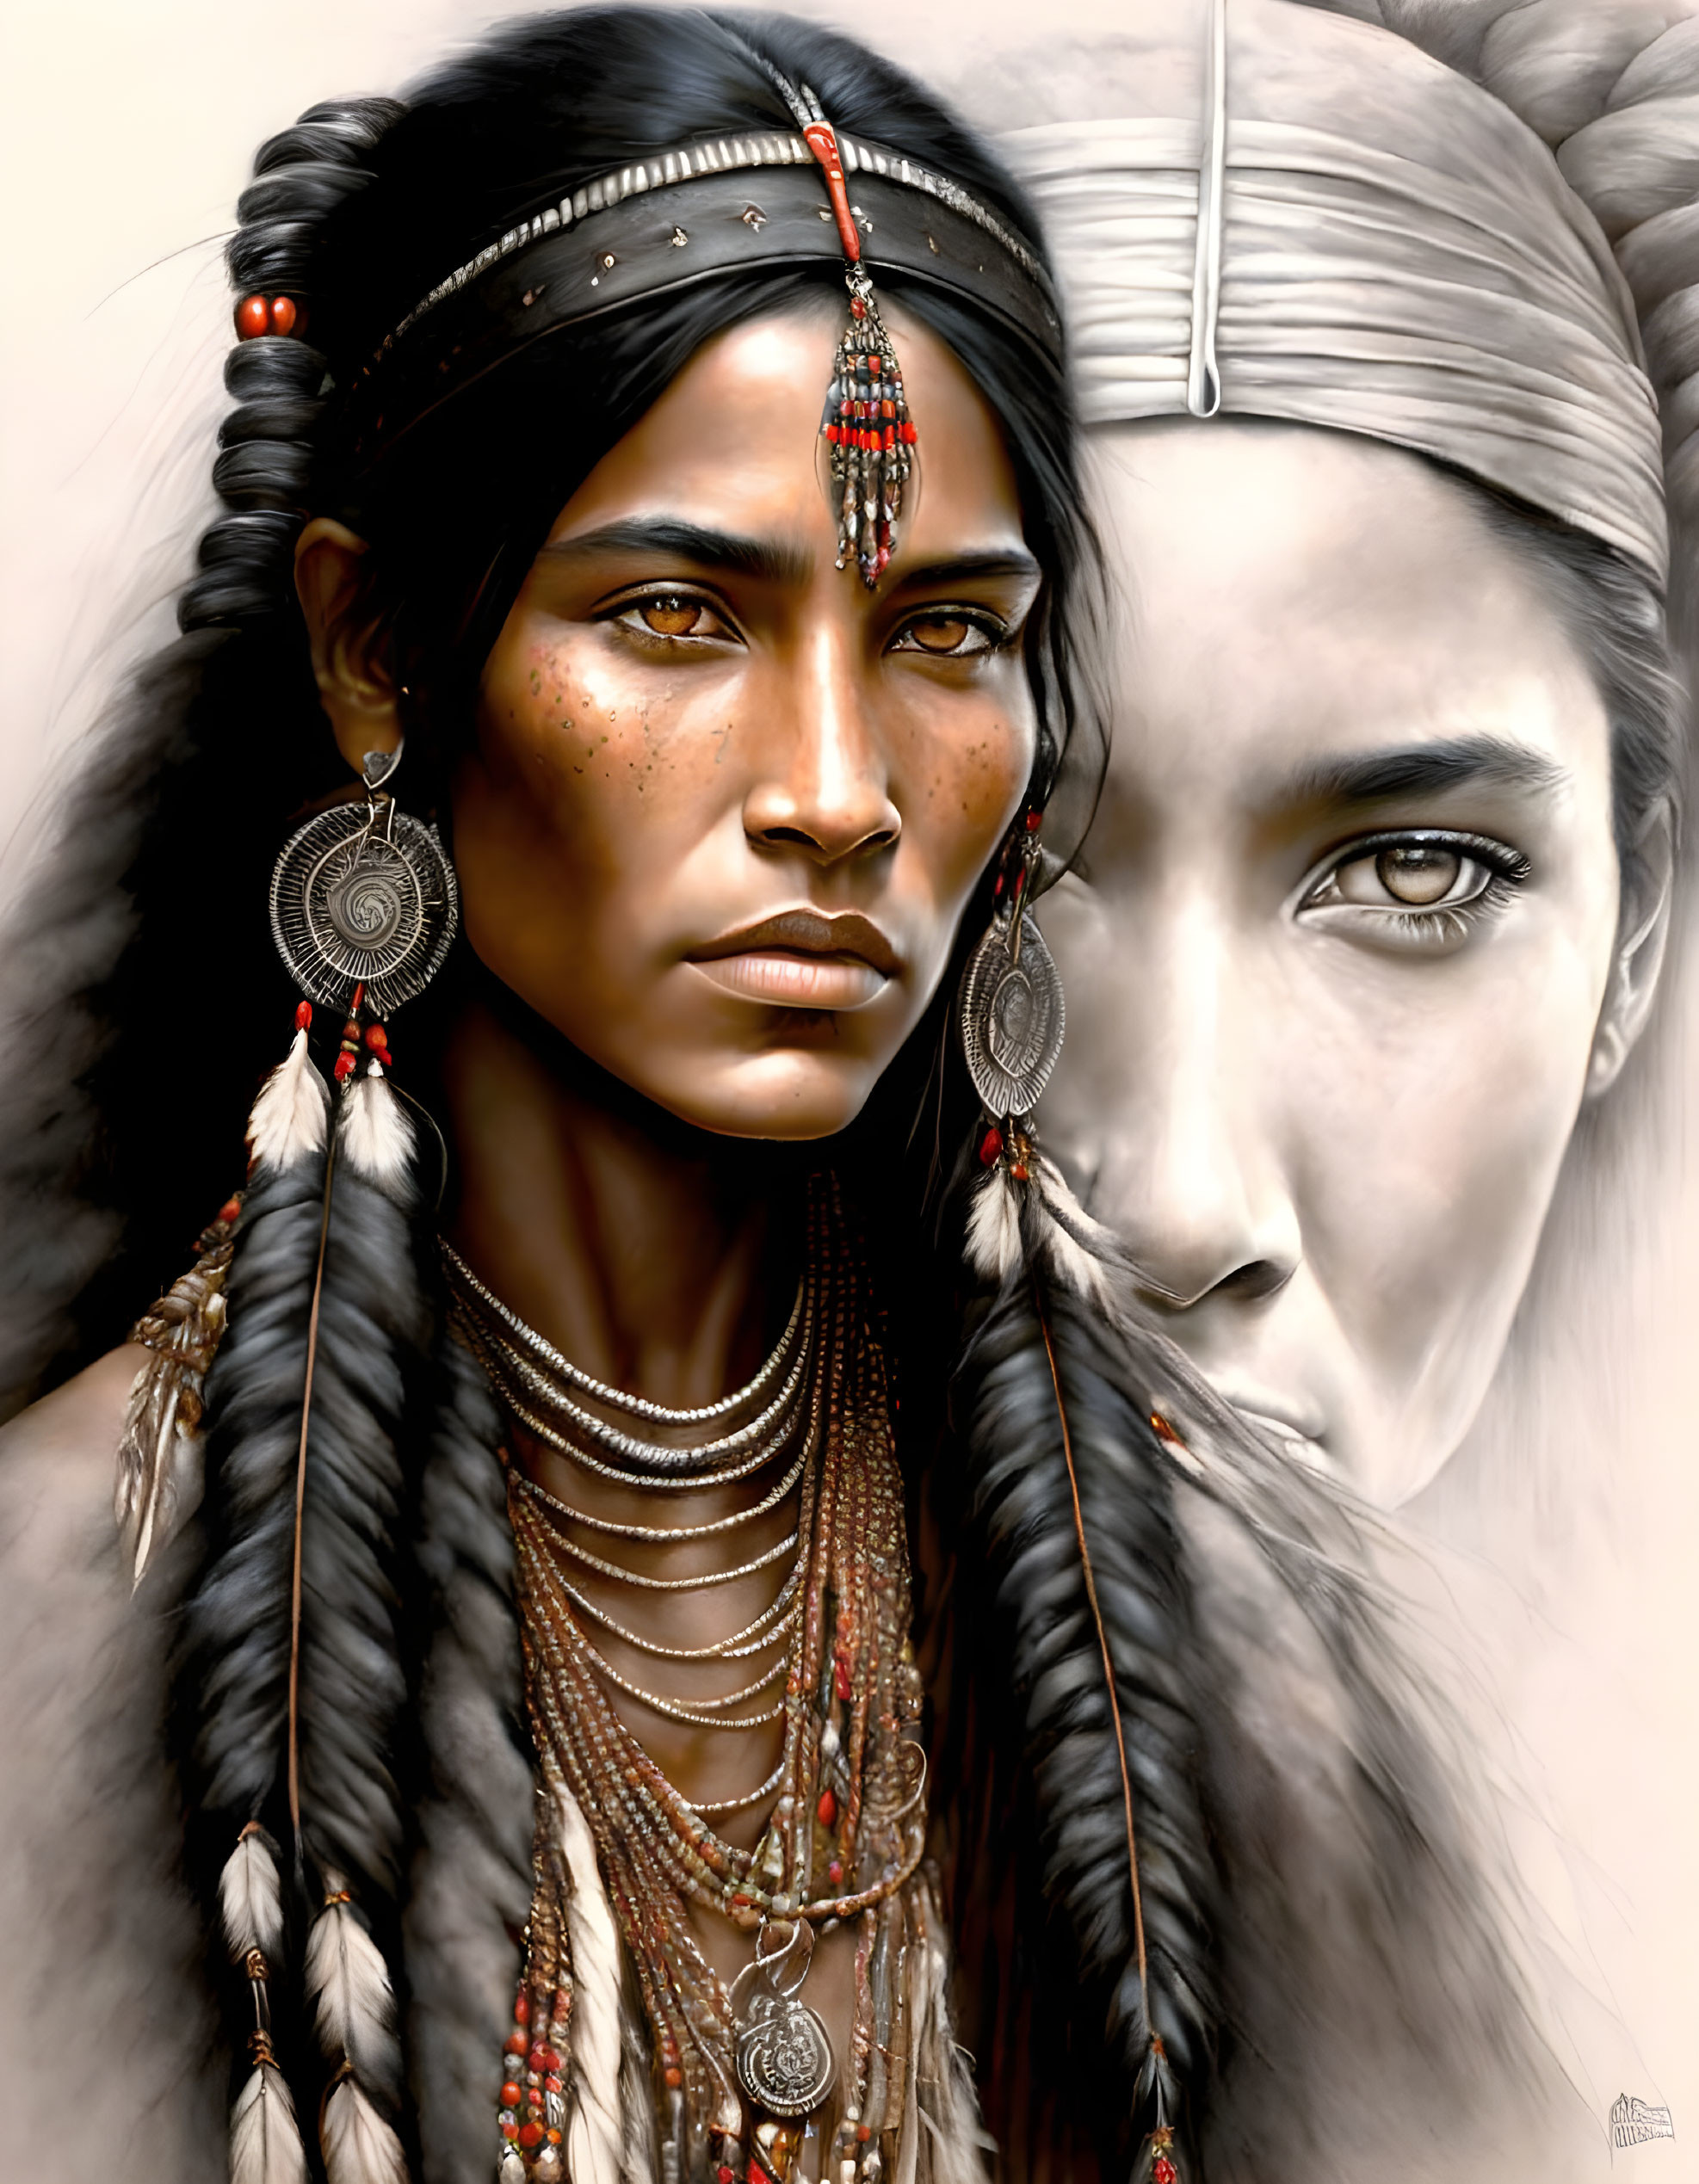 Beautiful face of a native american girl